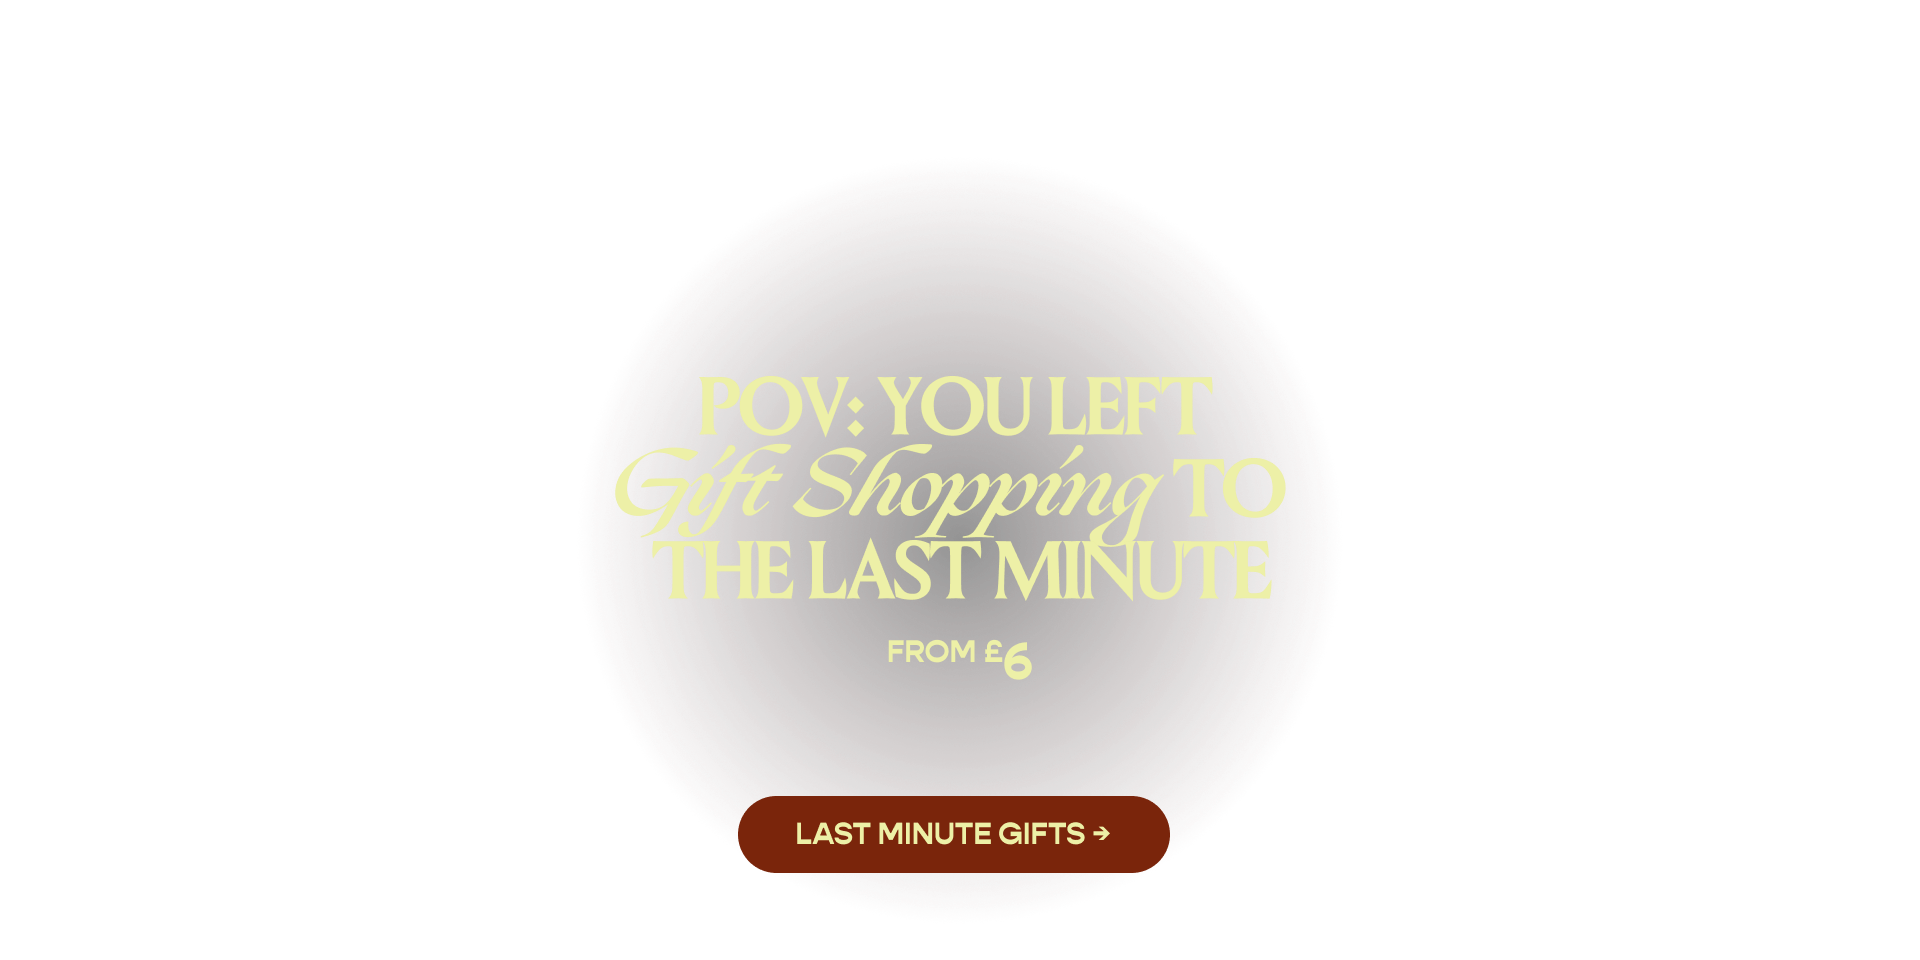 POV: You left gift shopping to the last minute. Shop Last Minute Gifts. From £6.